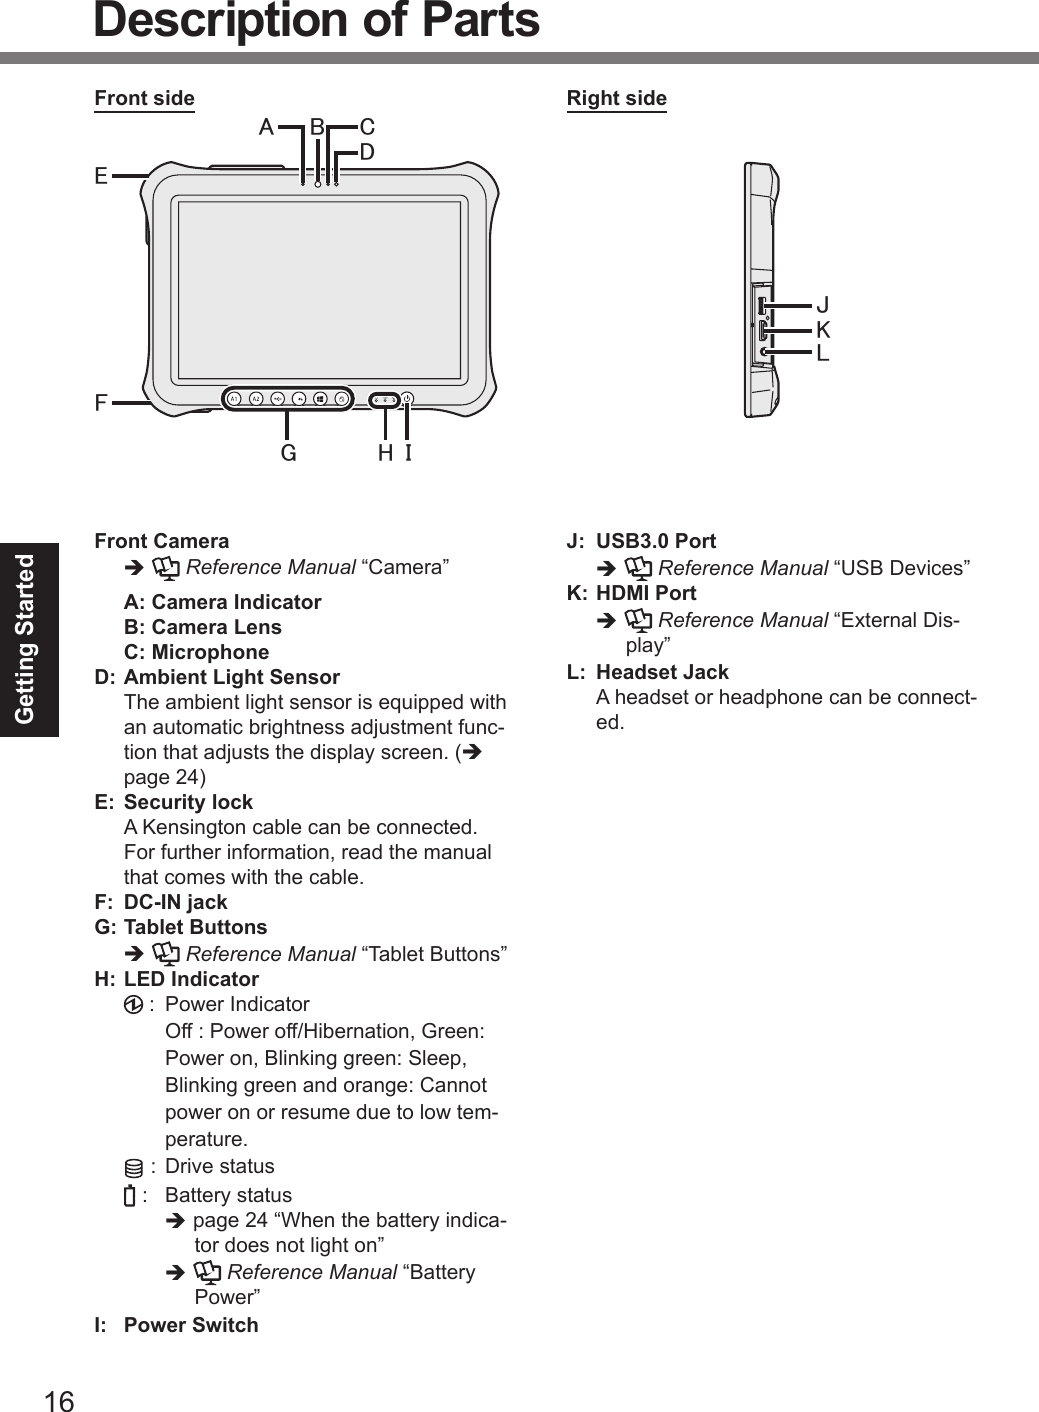 16Getting StartedDescription of PartsFront Cameraè  Reference Manual “Camera” A: Camera IndicatorB: Camera LensC: MicrophoneD: Ambient Light Sensor  The ambient light sensor is equipped with an automatic brightness adjustment func-tion that adjusts the display screen. (è page 24)E: Security lock  A Kensington cable can be connected. For further information, read the manual that comes with the cable.F:  DC-IN jackG: Tablet Buttonsè  Reference Manual “Tablet Buttons” H: LED Indicator  :  Power Indicator    Off : Power off/Hibernation, Green: Power on, Blinking green: Sleep, Blinking green and orange: Cannot power on or resume due to low tem-perature.  :  Drive status  :  Battery statusè page 24 “When the battery indica-tor does not light on”è  Reference Manual “Battery Power”I:  Power SwitchJ:  USB3.0 Portè   Reference Manual “USB Devices” K: HDMI Portè   Reference Manual “External Dis-play”L:  Headset Jack  A headset or headphone can be connect-ed.Front side㪙㪞㪜㪝㪟㪠㪘㪚㪛㪡㪢㪣Right sideDFQW5716ZAT_FZ-G1mk1_8_7_OI_M.indb   16 2013/01/11   17:13:40